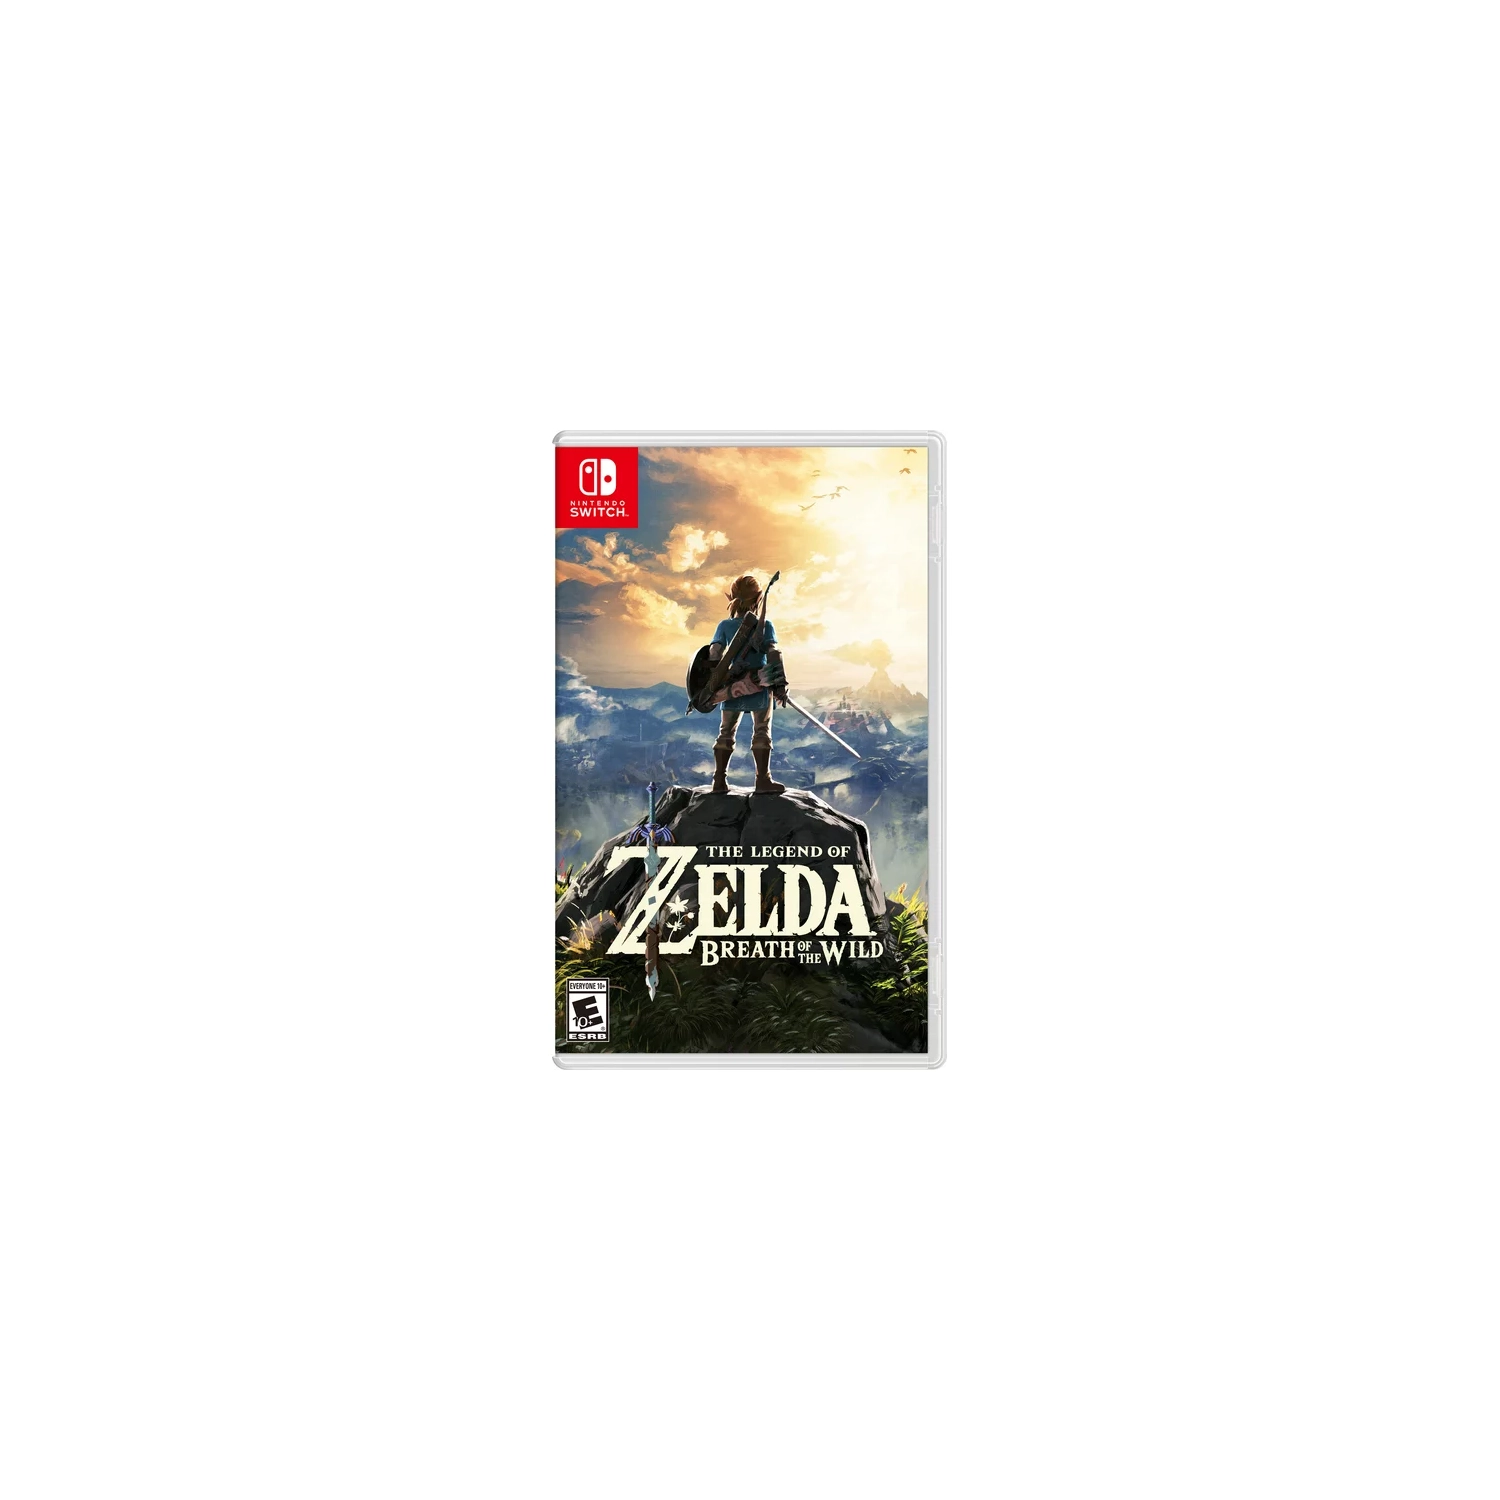 The Legend of Zelda: Breath of the Wild for Nintendo Switch [VIDEOGAMES]